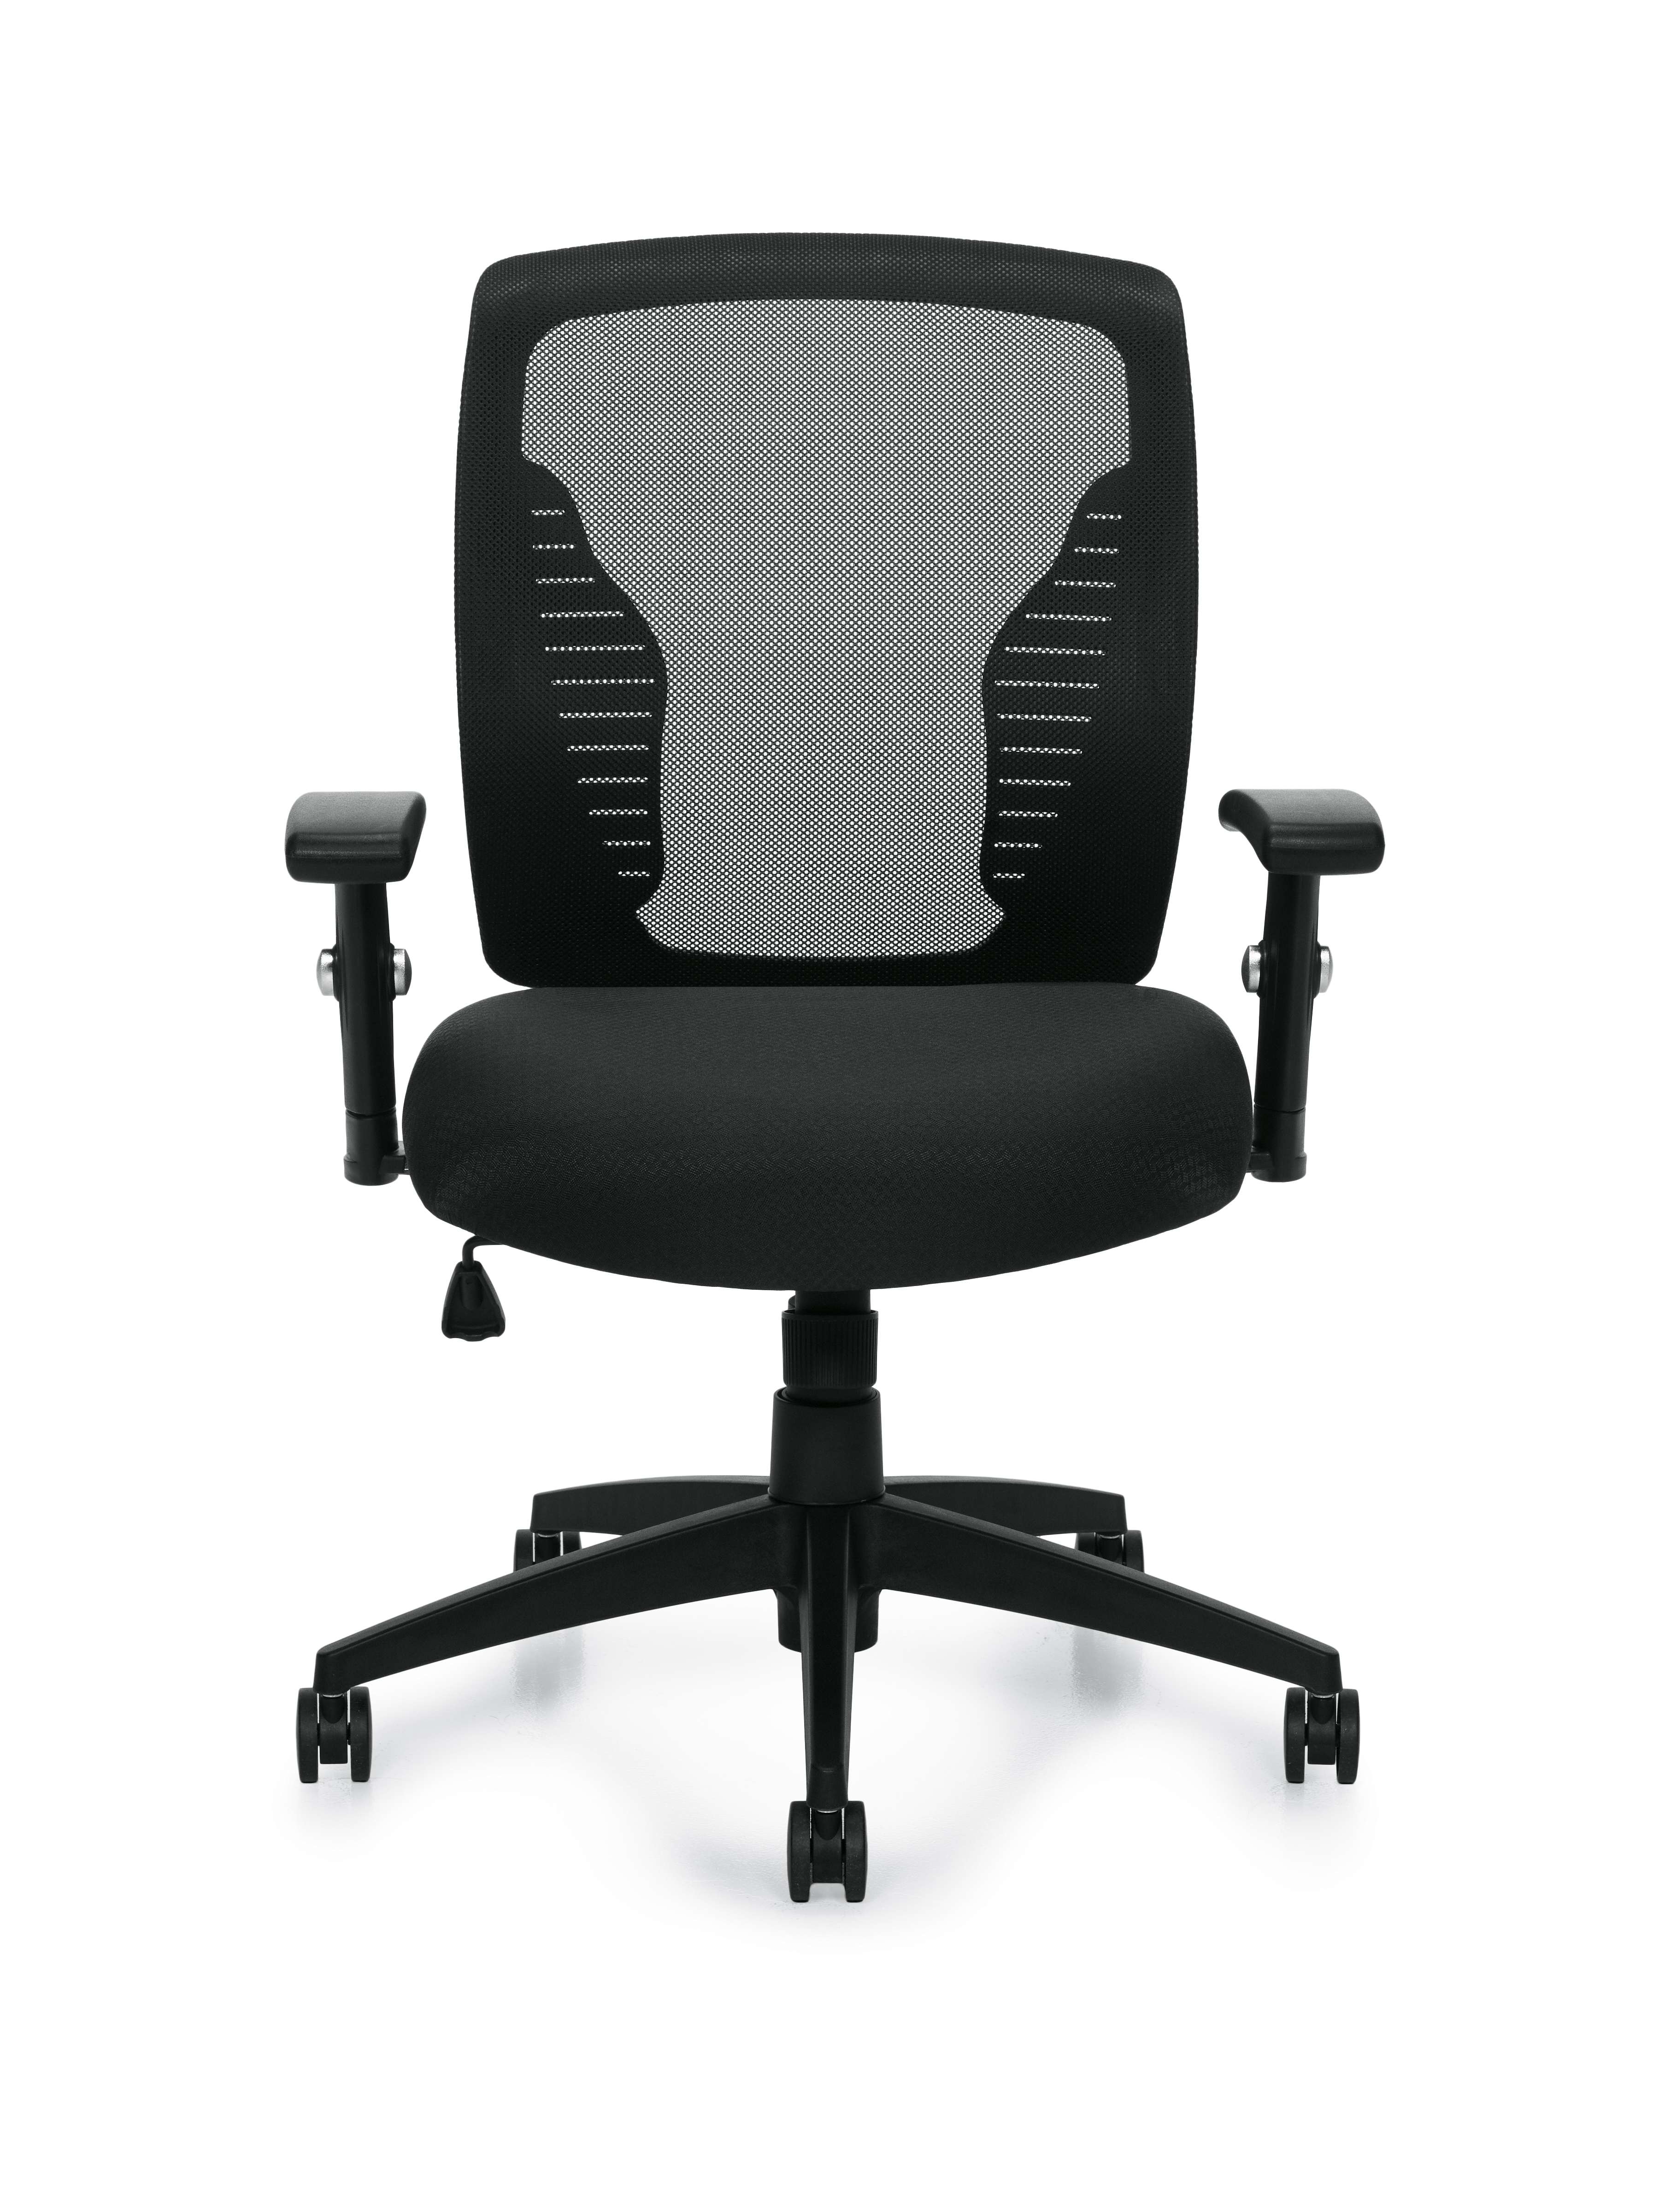 Office Desk Chairs - Zami Mesh Seat Office Chair